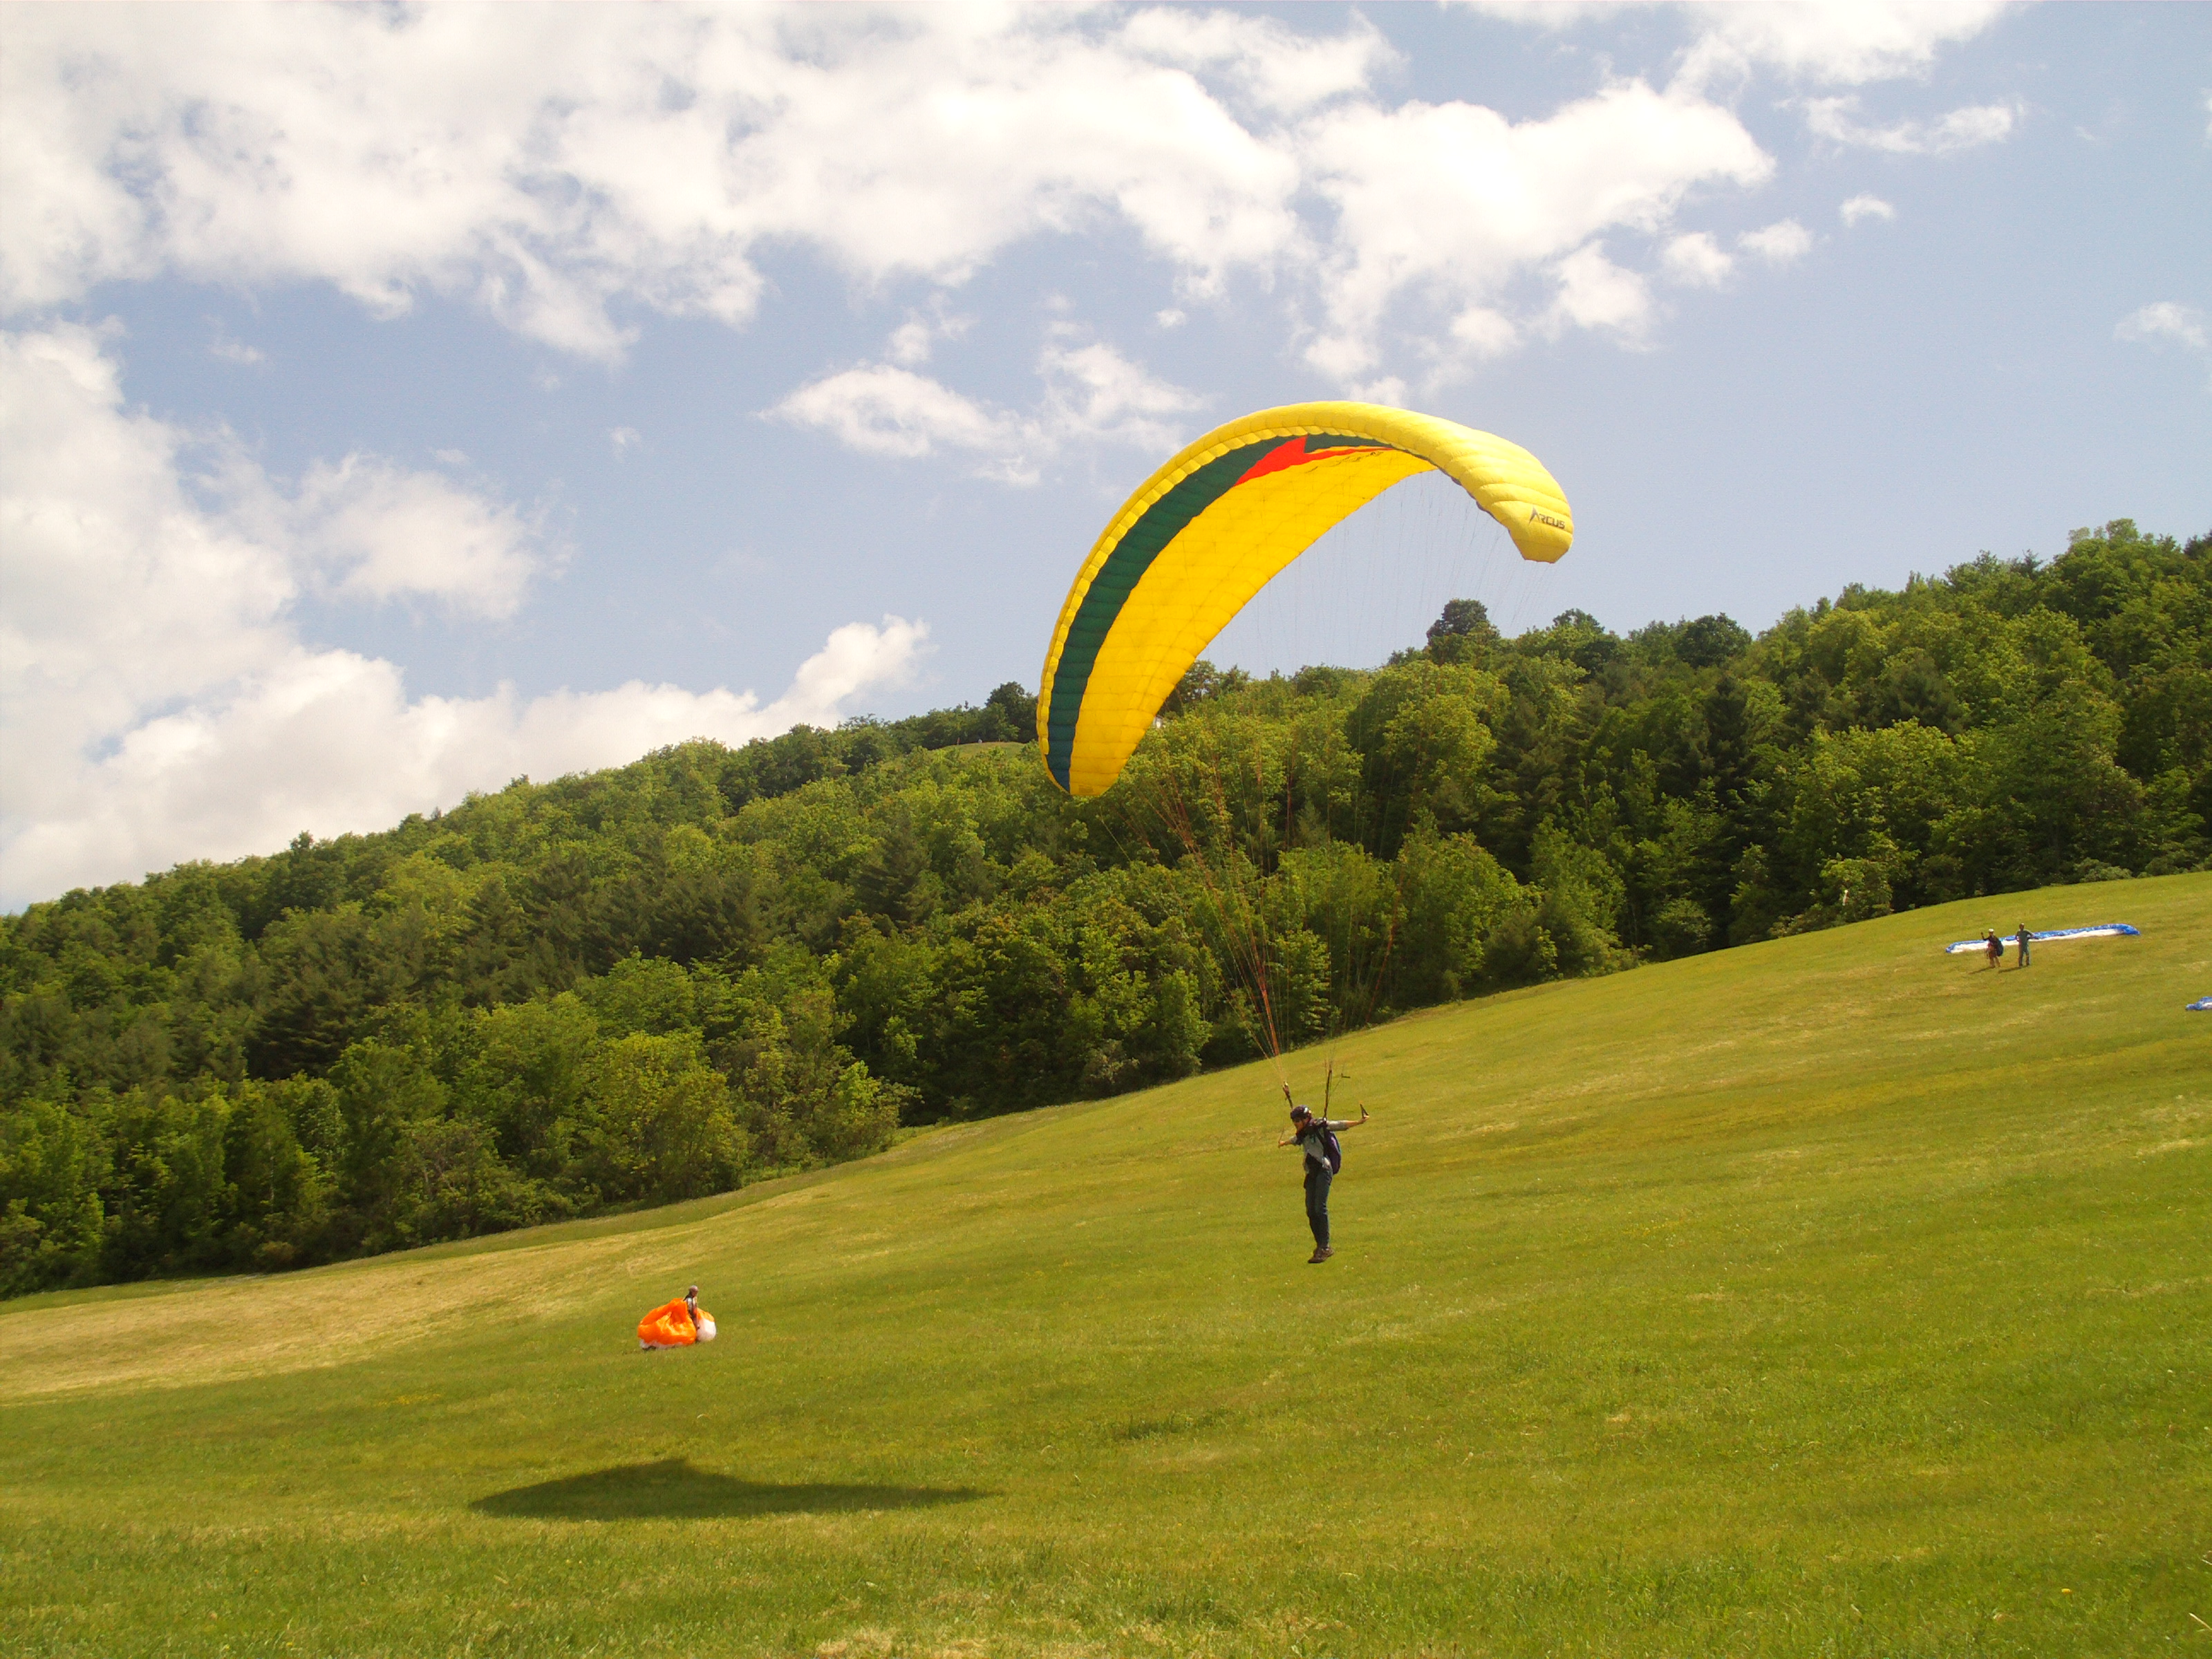 Weekend Intro Paragliding Lesson | Morningside Hang Gliding and Paragliding